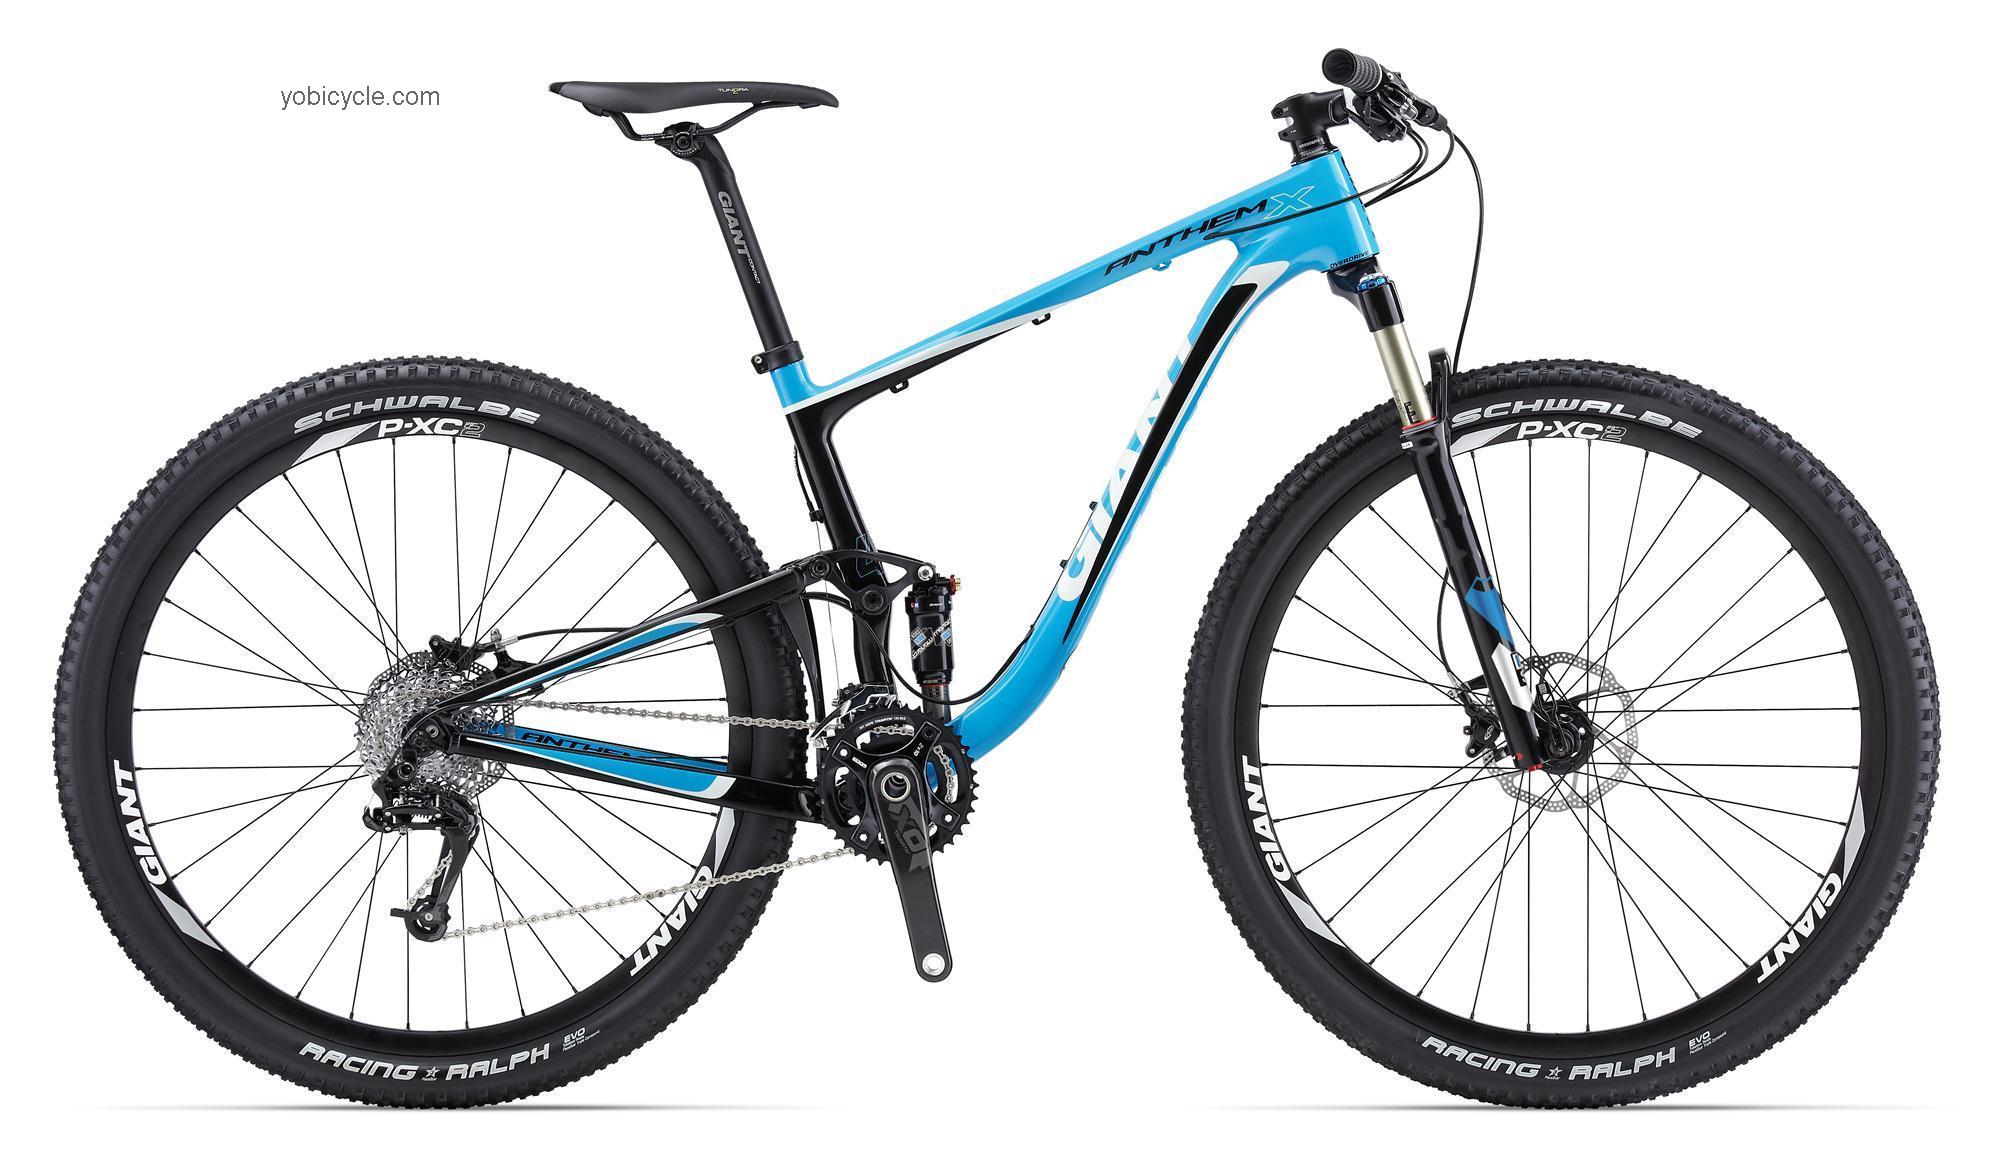 Giant Anthem X Advanced 29er 1 2013 comparison online with competitors